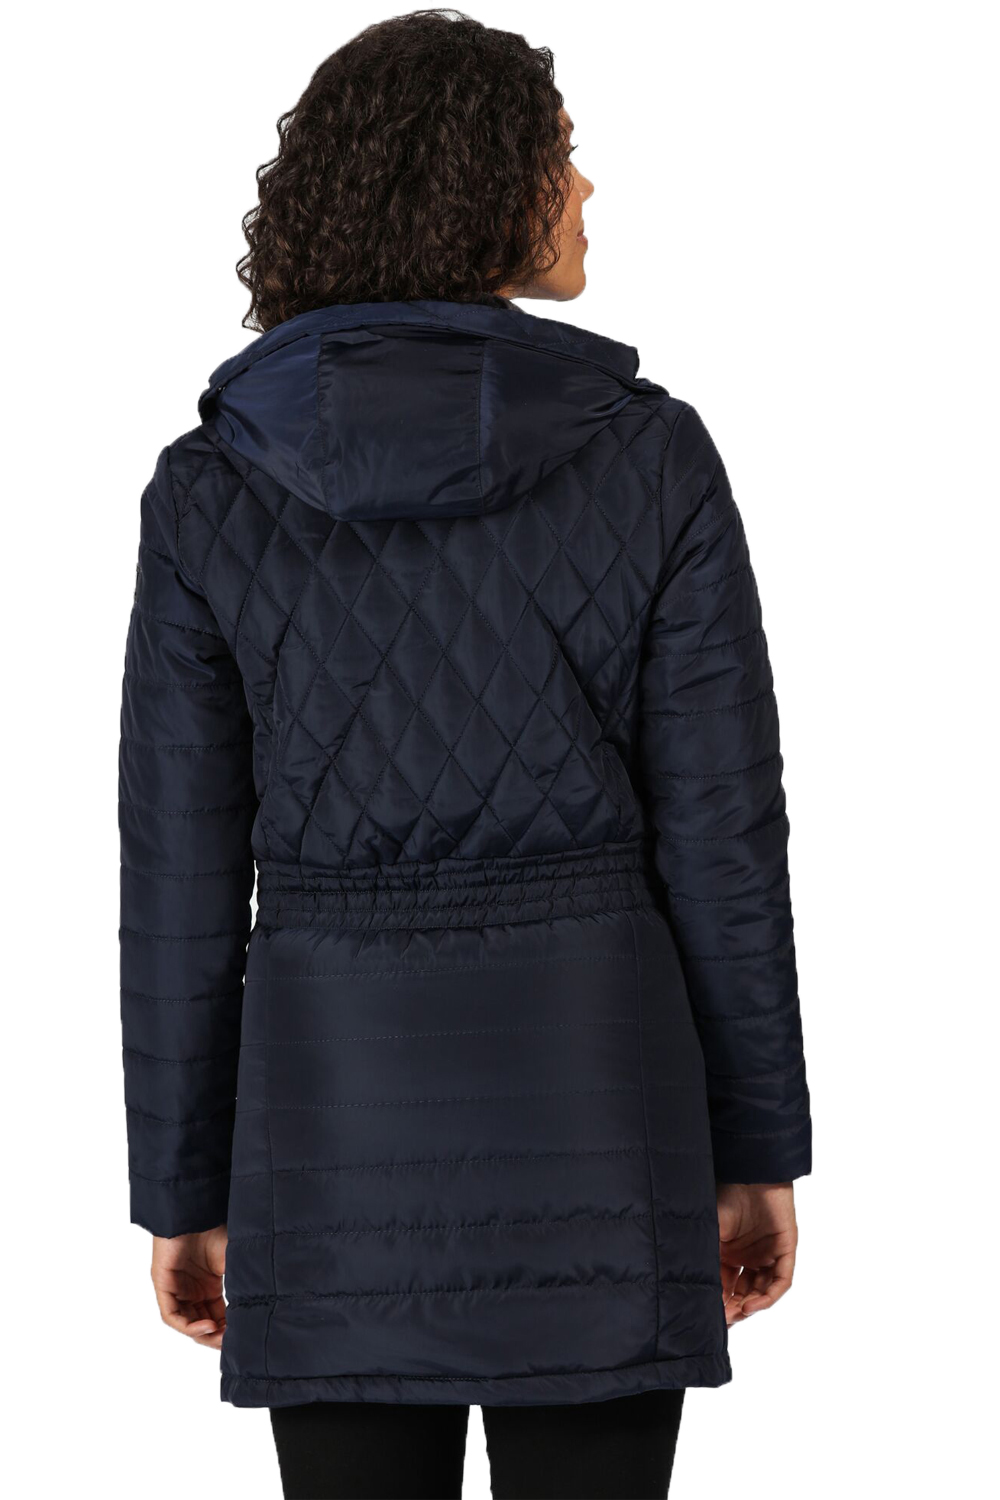 Regatta Parmenia Womens Quilted Insulated Hooded Zip Up Parka Long Coat Jacket | eBay